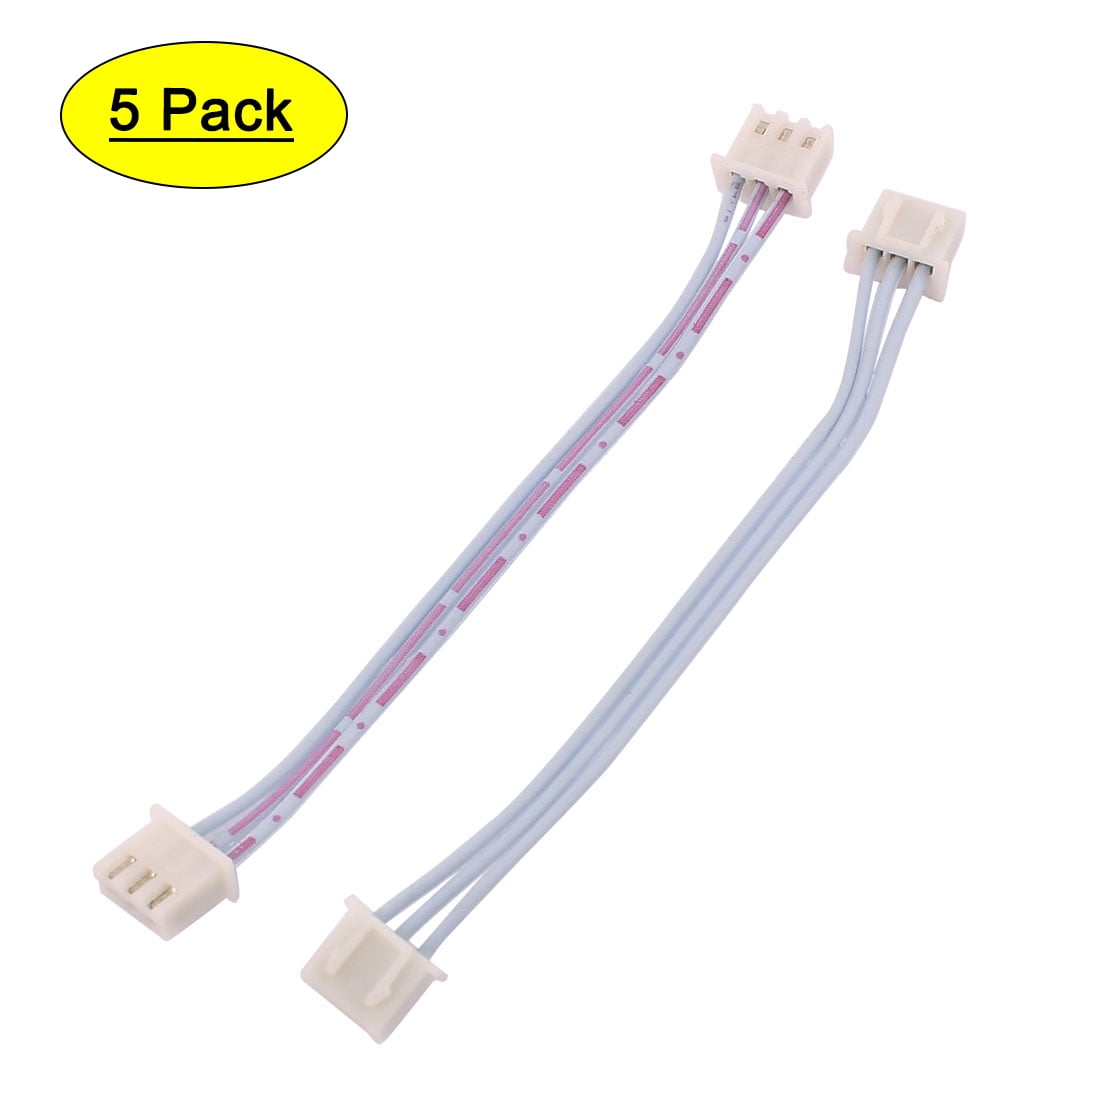 5Pcs Dual End XH2.54 3P Female Connector Cable 10cm w Pin Header -